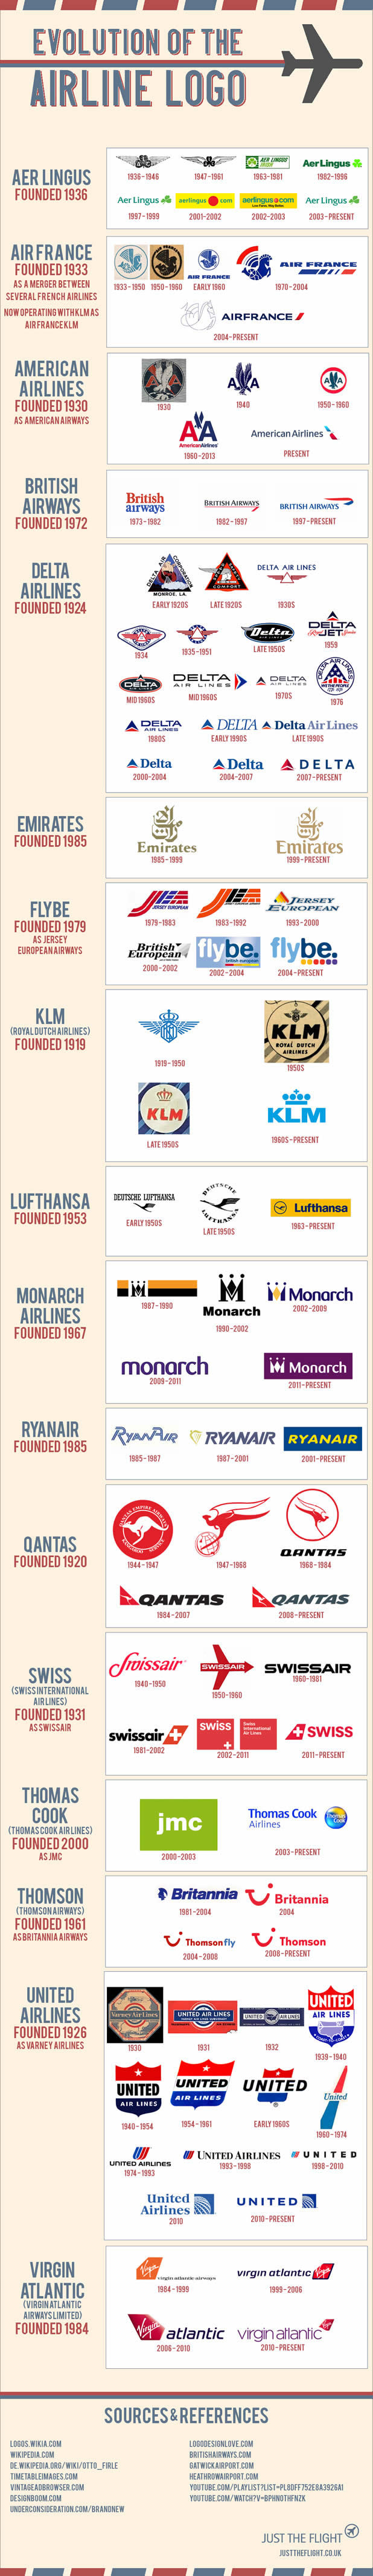 The evolution of the airline logo